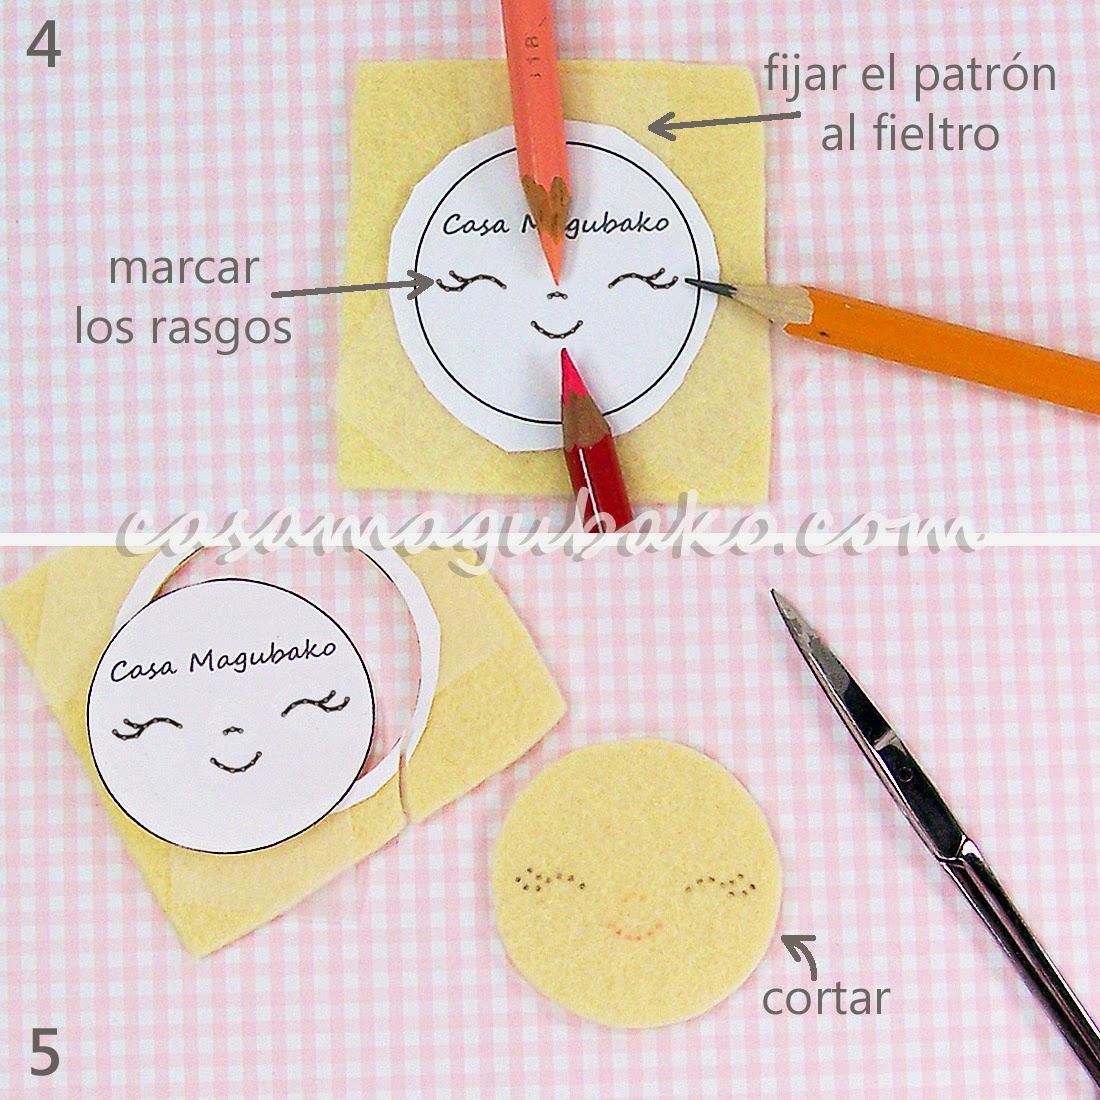 Transferring Facial Features - Marking and Cutting by casamagubako.com